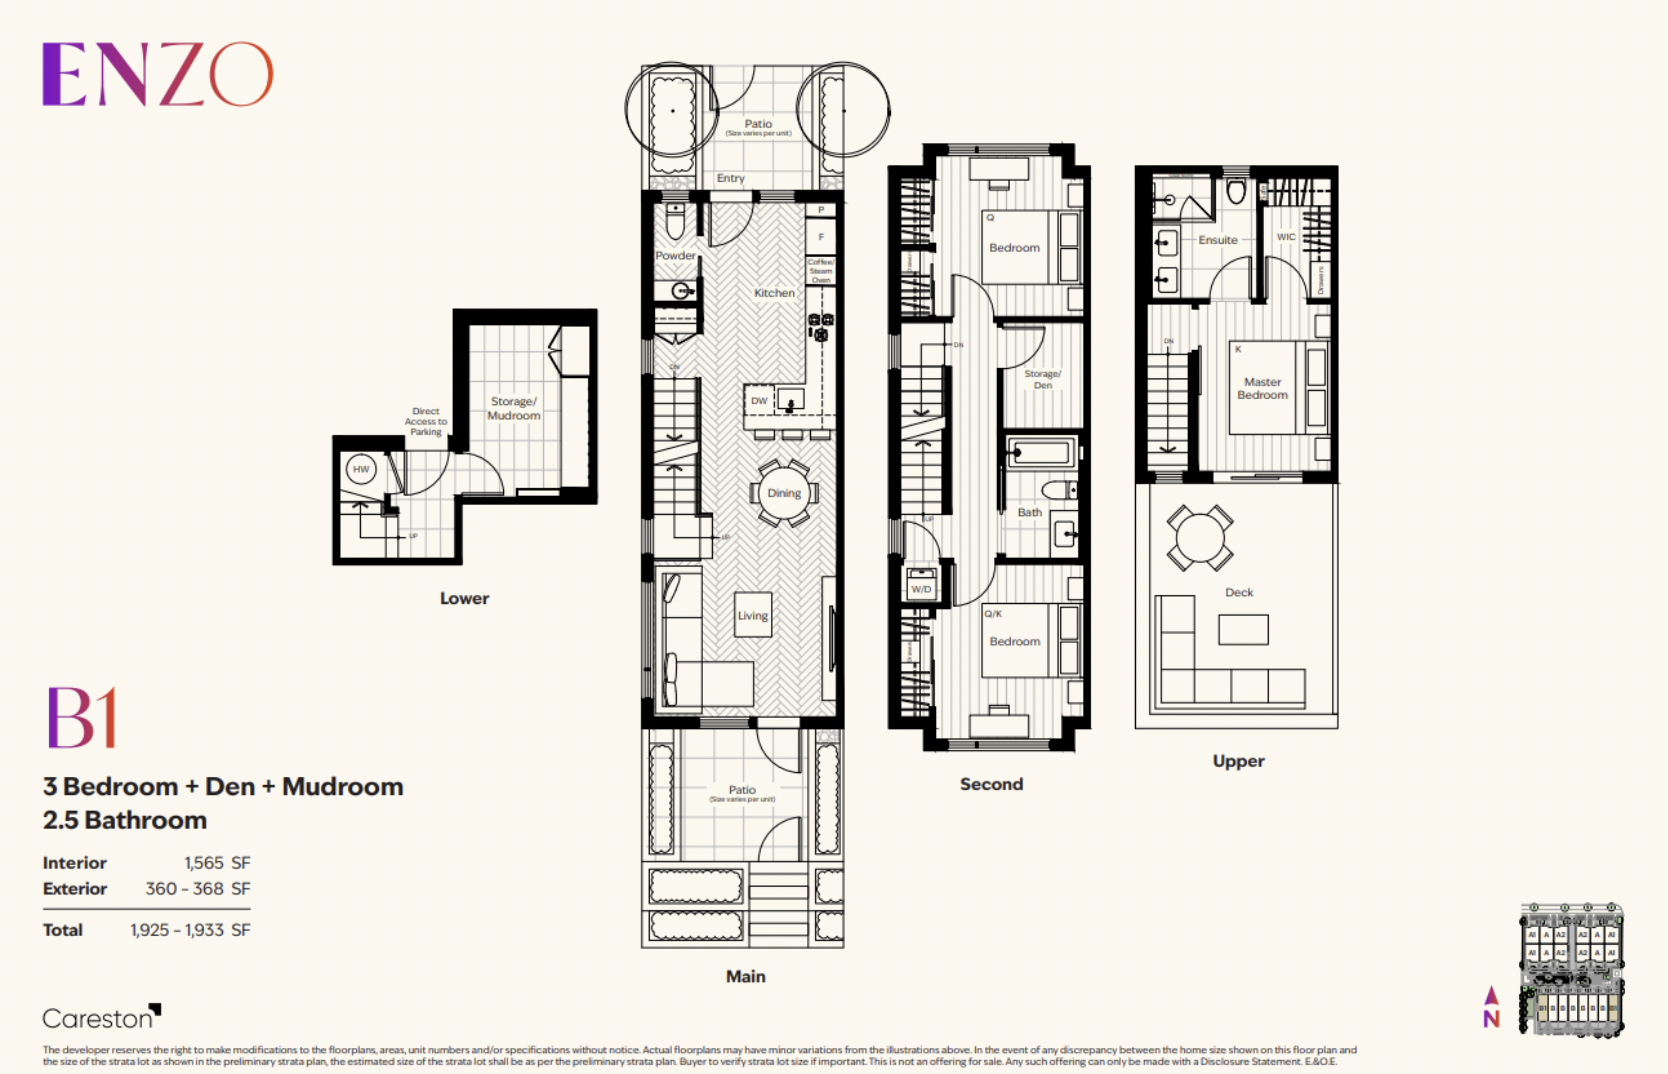 Vancouver townhouses for sale enzo B1